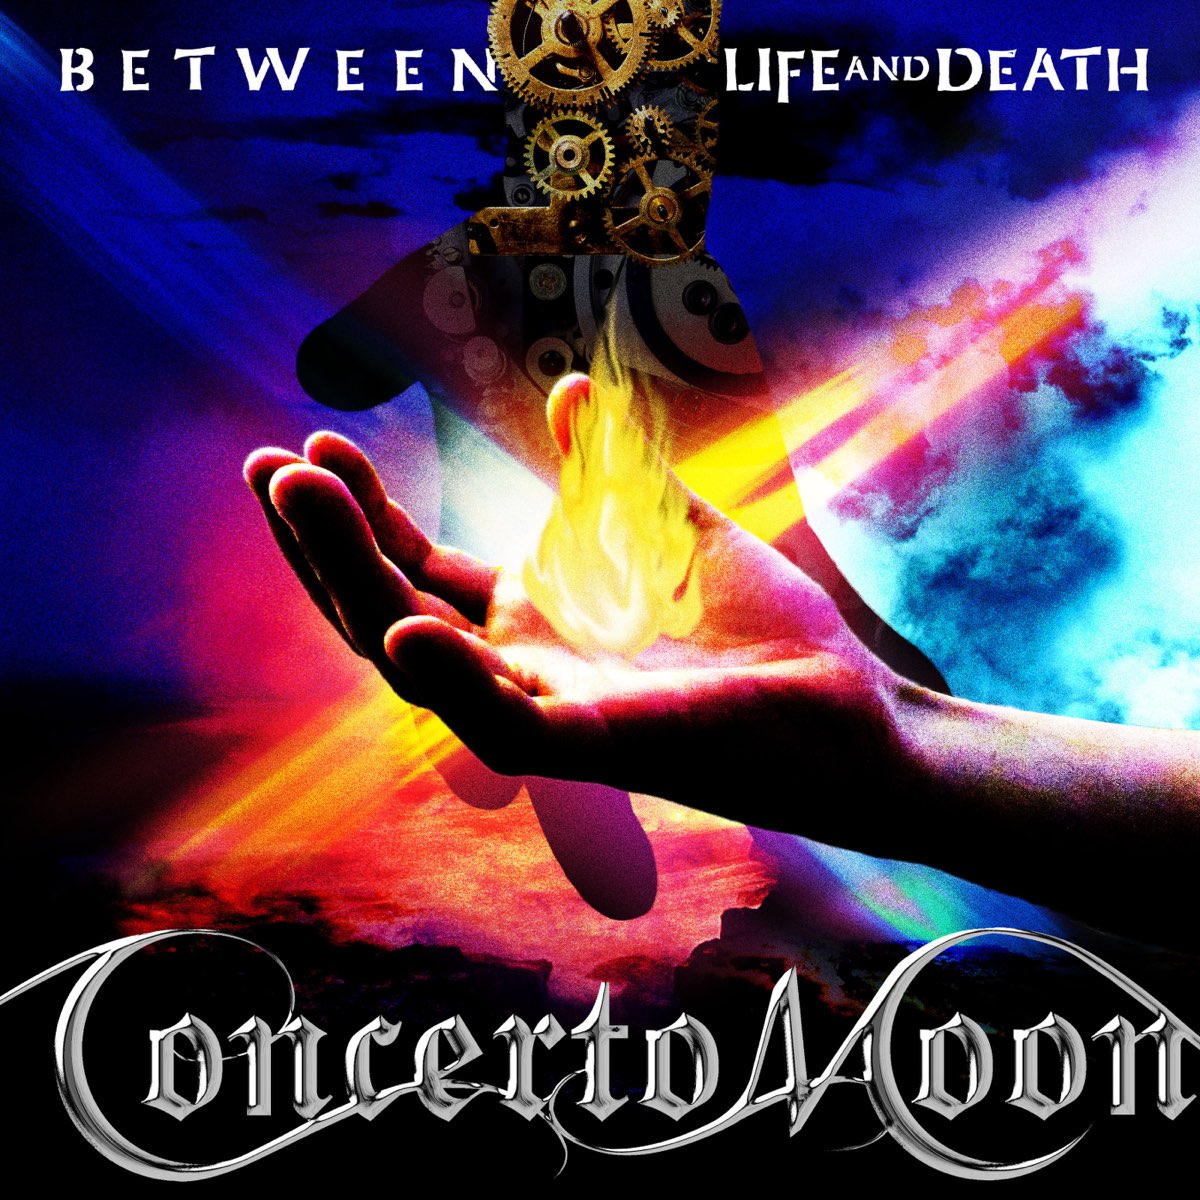 Between the moons. Between Life and Death. Concerto Moon - Rise from Ashes. Concerto Moon logo.